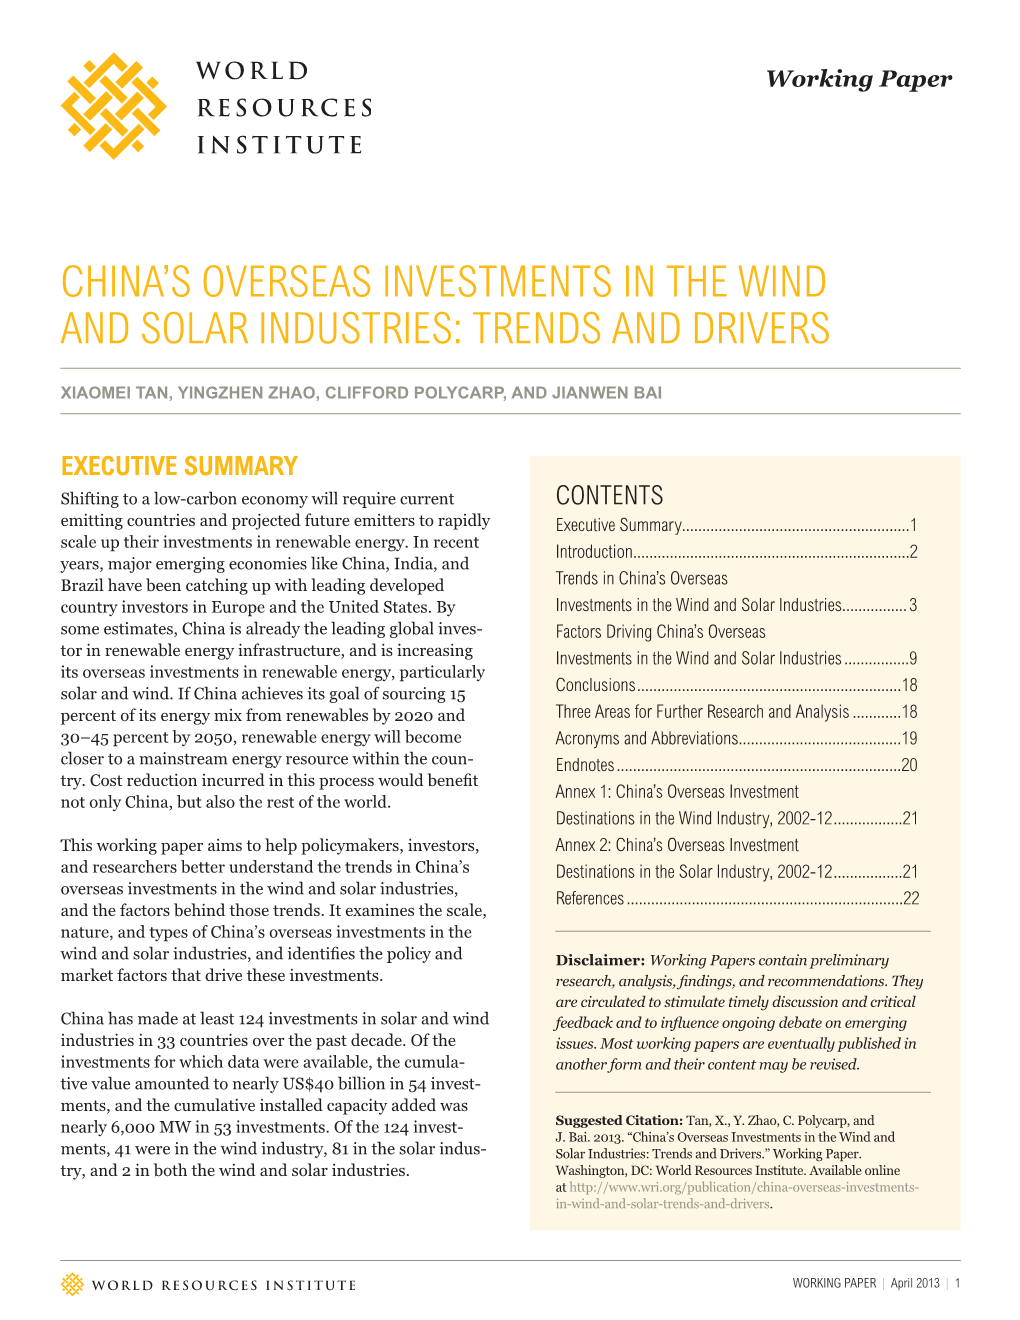 China's Overseas Investments in the Wind and Solar Industries